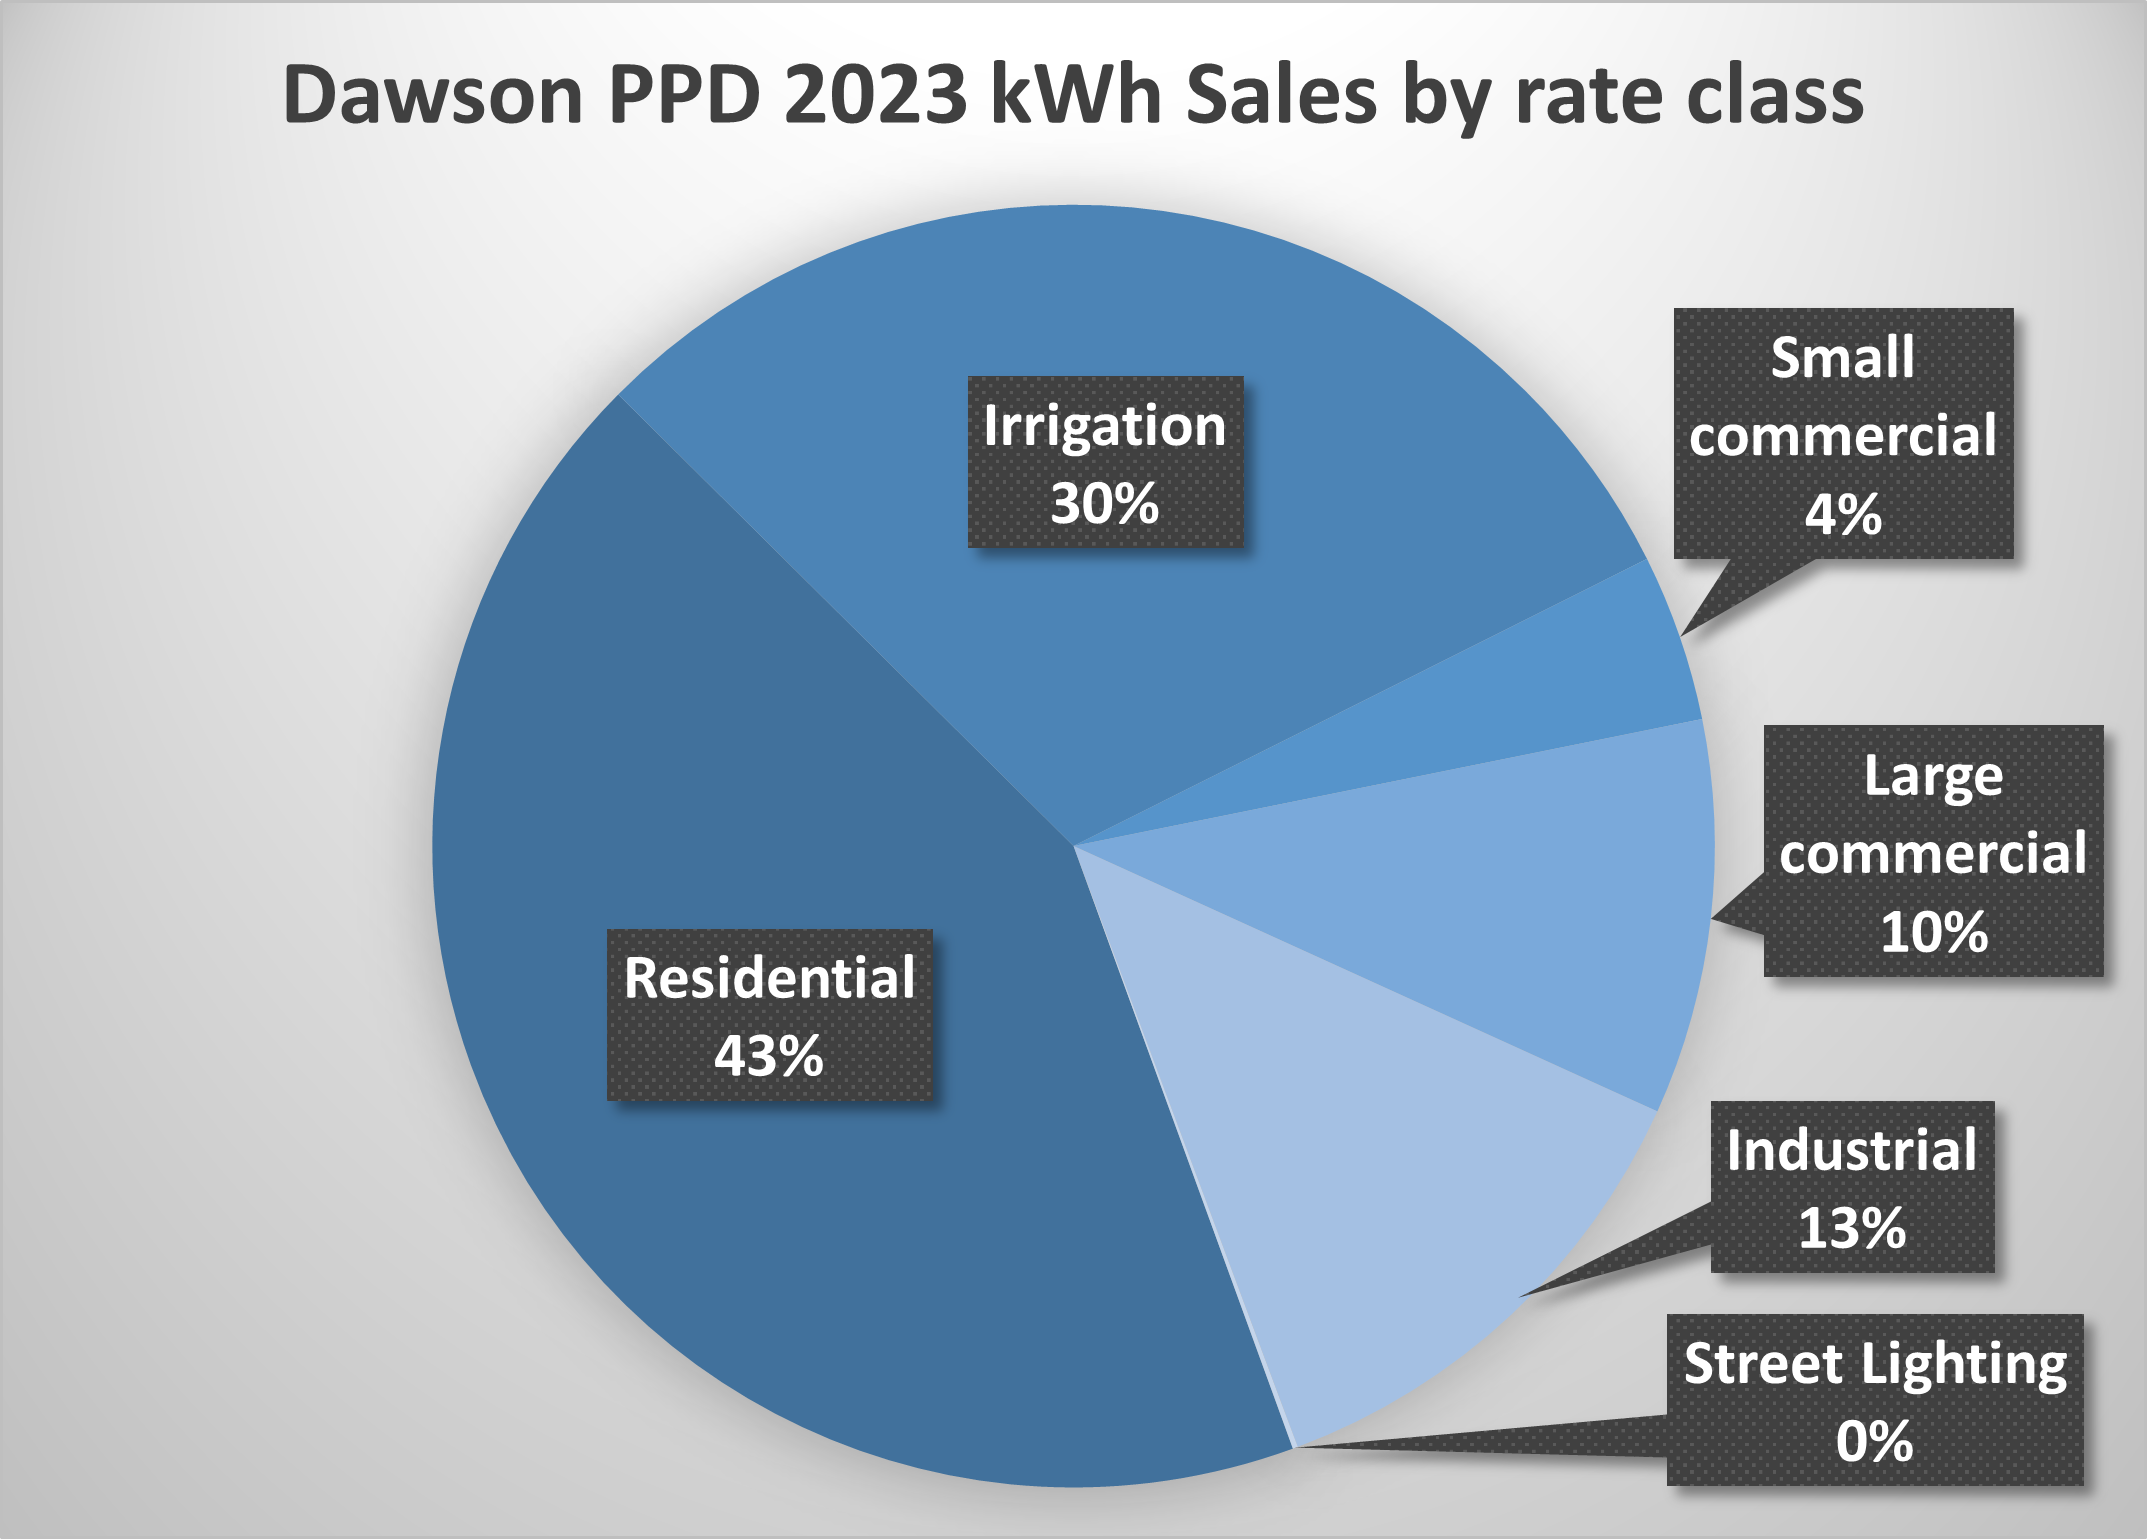 Dawson PPD 2023 kWh sales by rate class